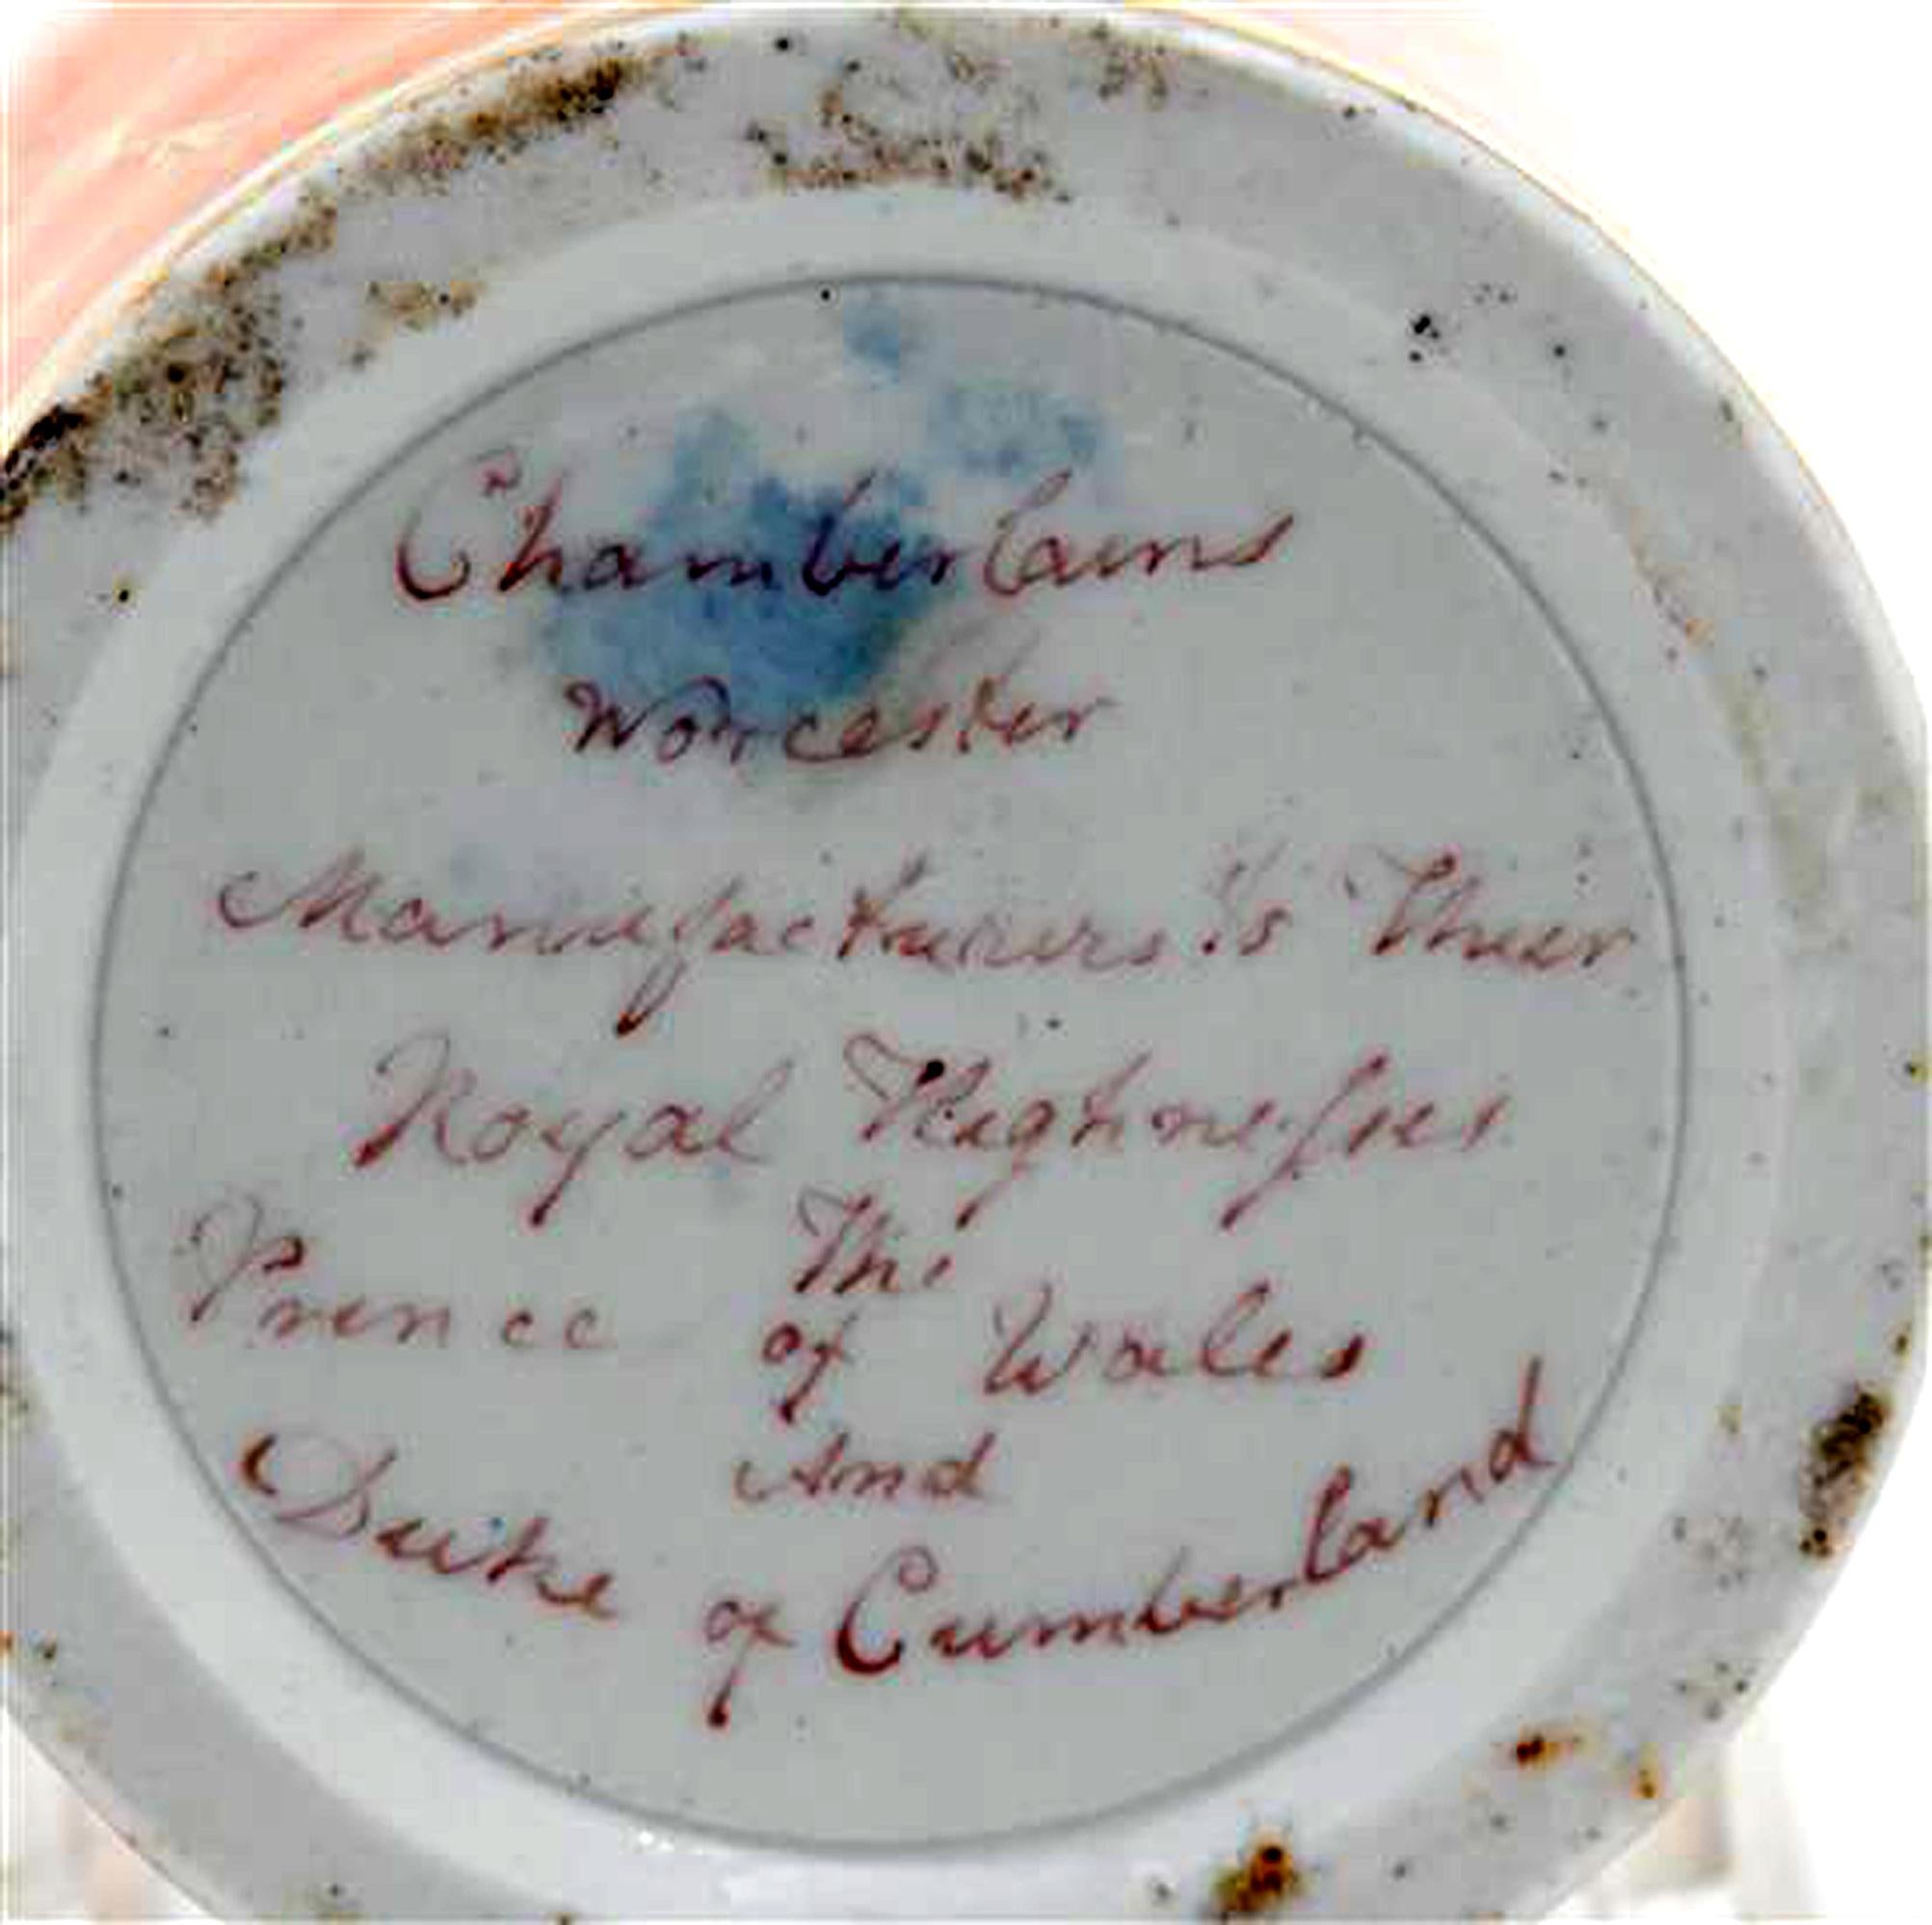 Chamberlain worcester porcelain feather-decorated inkwell,
circa 1810.

The drum-shaped inkwell with a faux orange marble ground is painted on the front with a variety of bird feathers. The reverse with a marbled orange ground.

Dimensions: 2 1/2